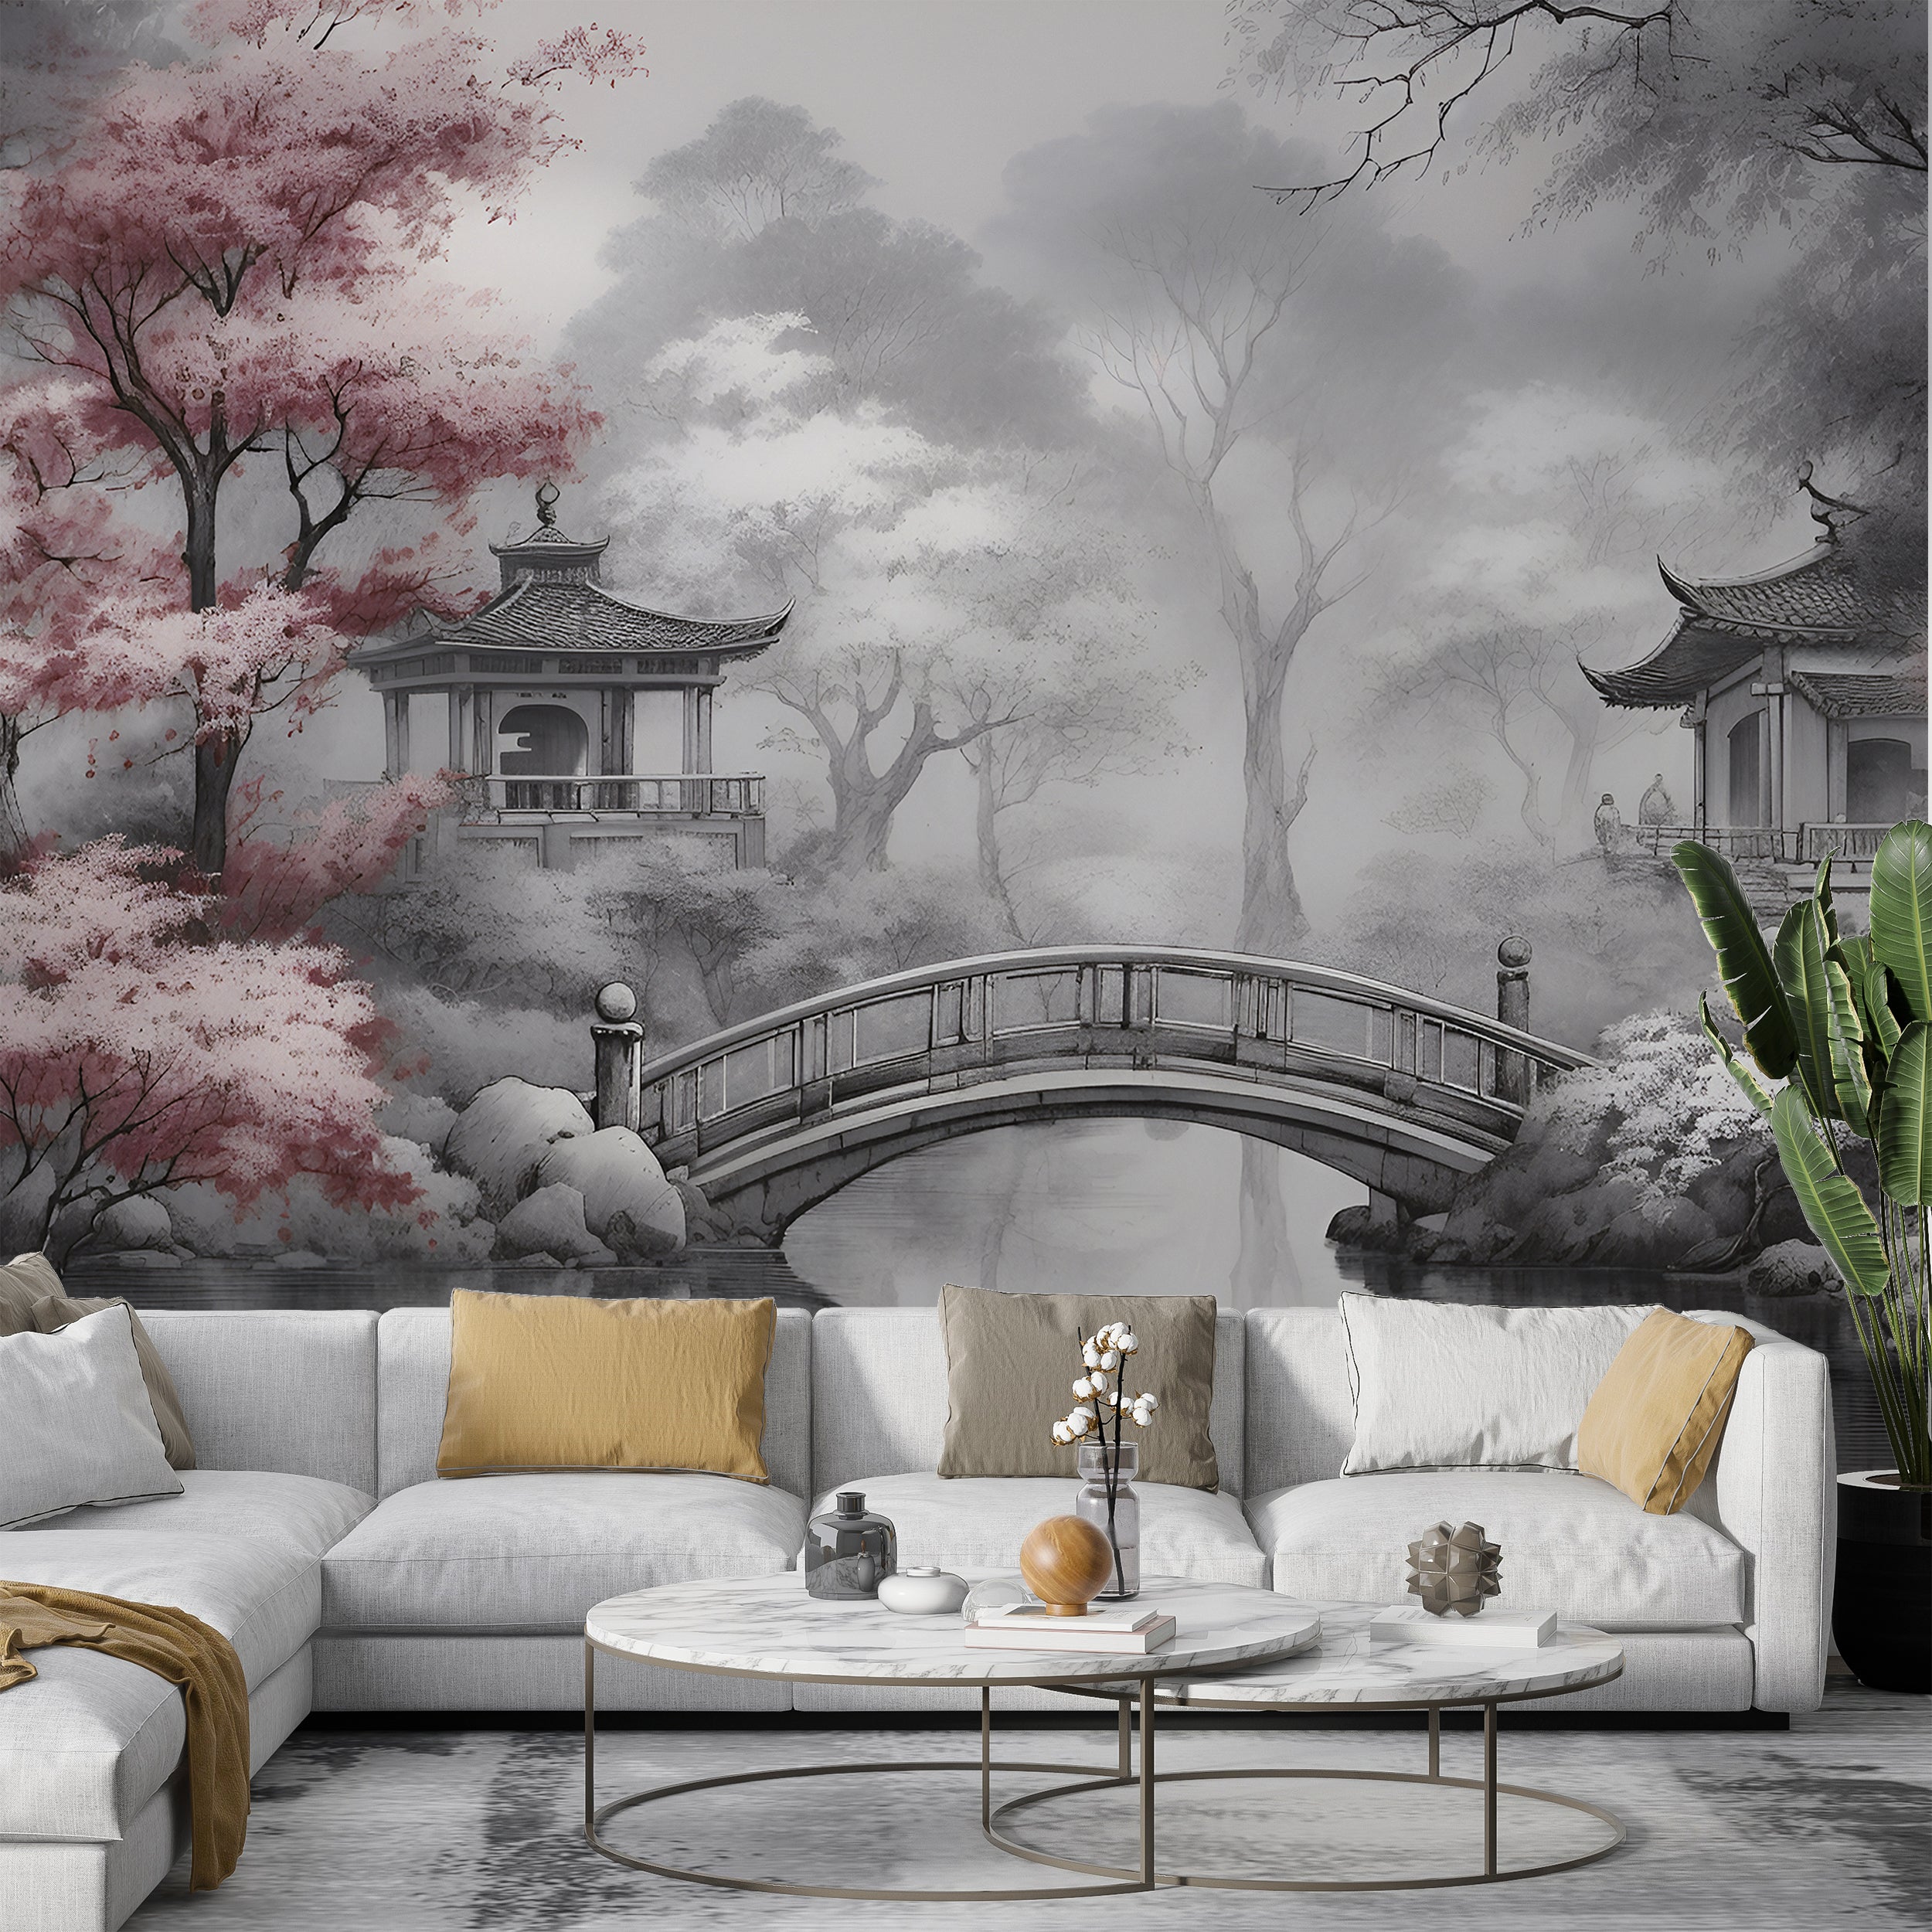 Toile De Jouy Mural for Sophisticated Ambiance